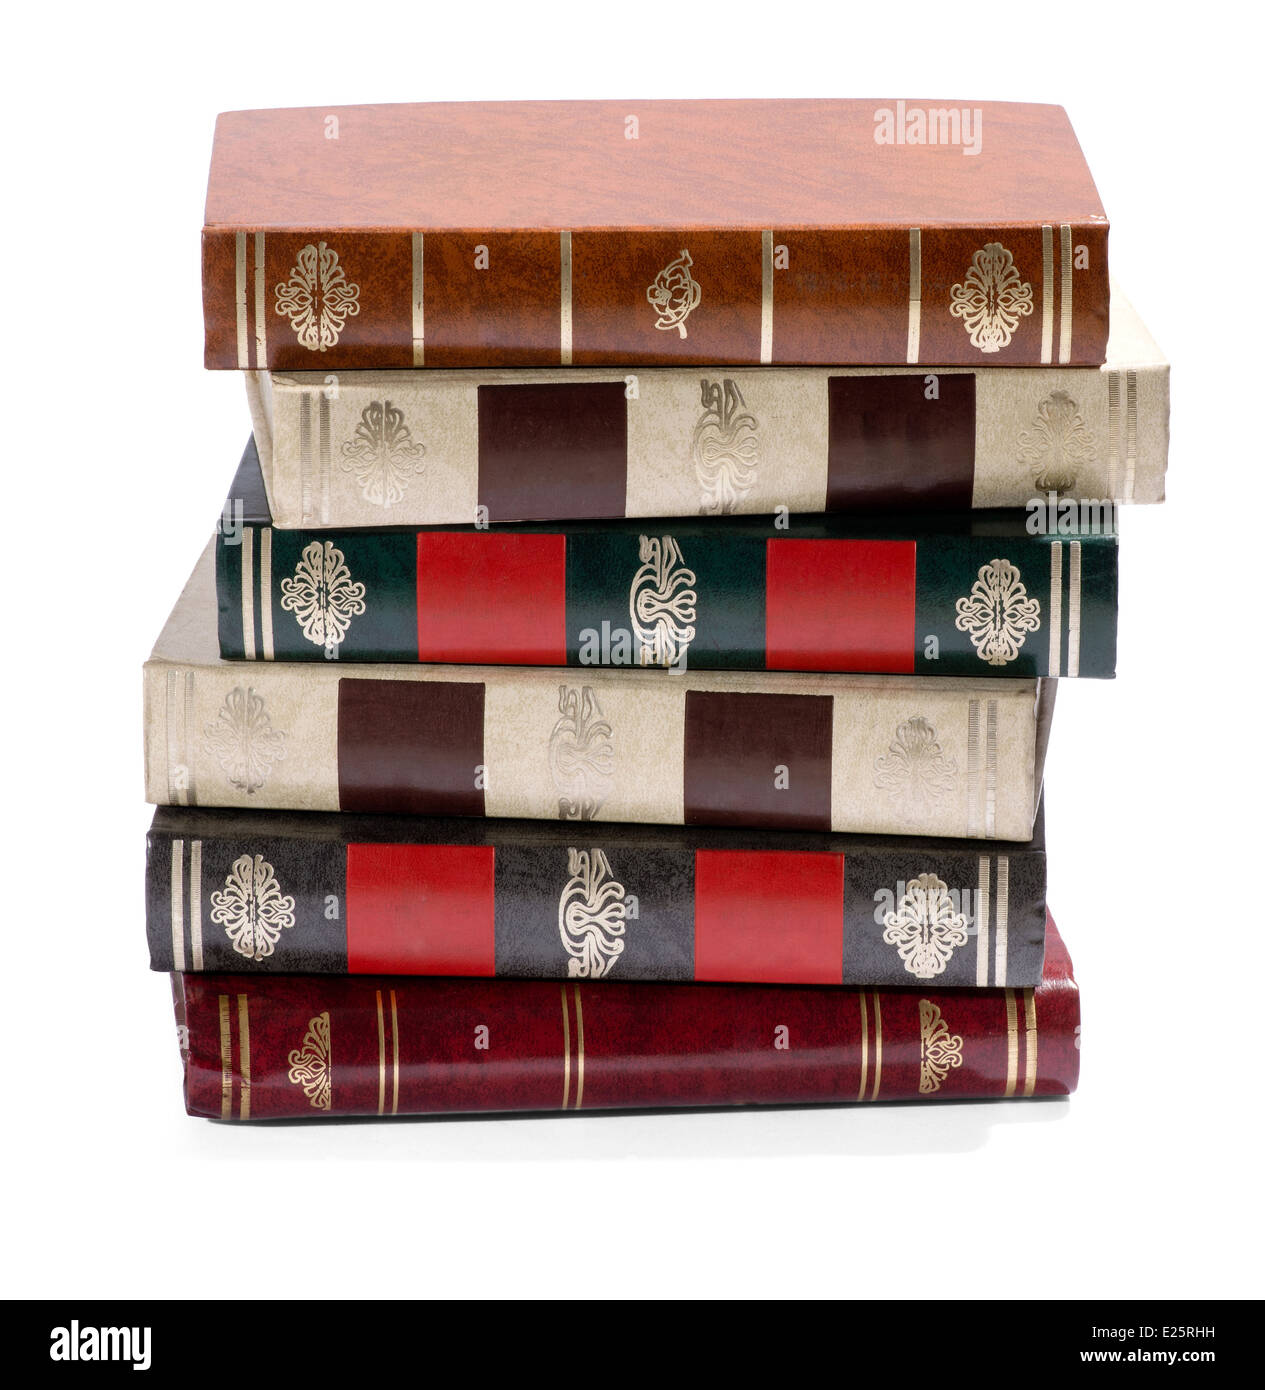 Stack of old books with gilt tooled spines Stock Photo